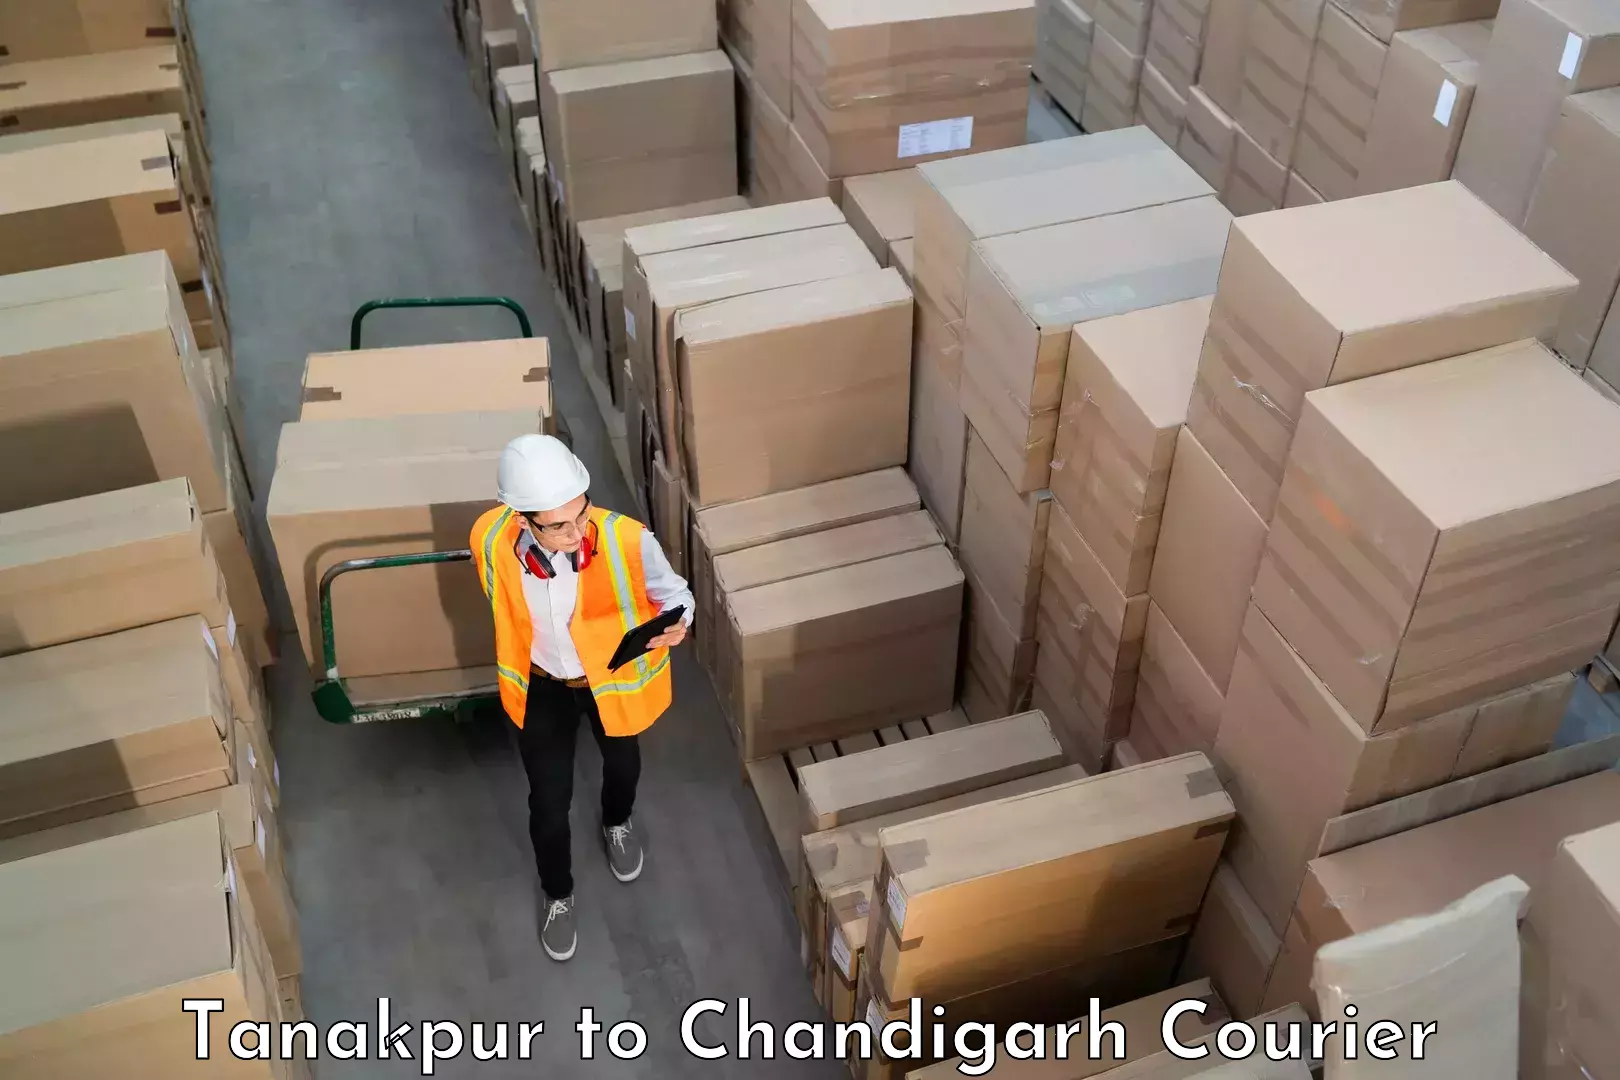 Luggage transport consultancy Tanakpur to Chandigarh